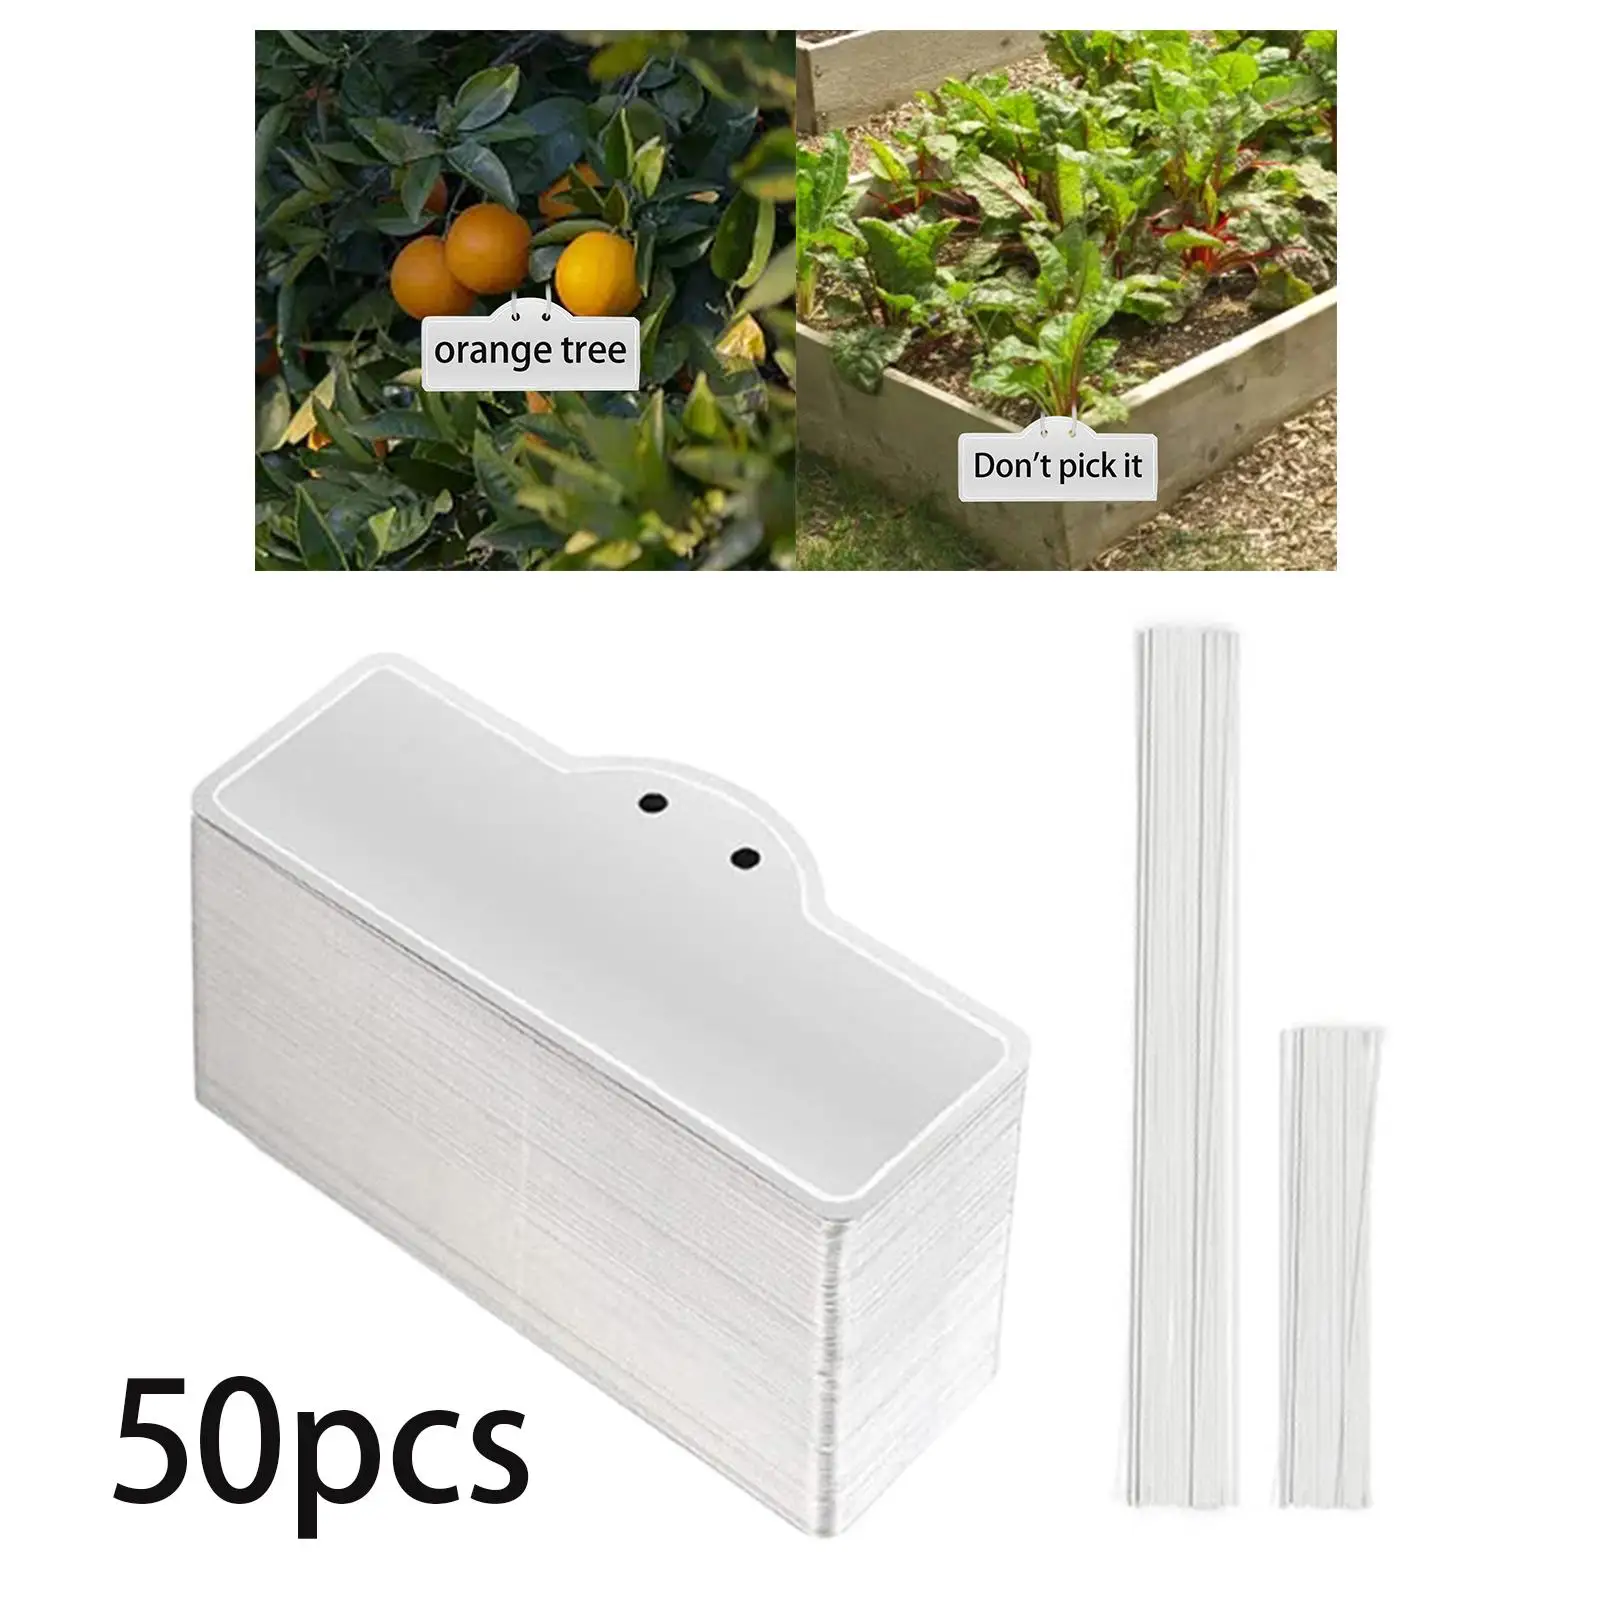 50 Pieces Hanging Plant Labels Durable Nursey Seeding Double Sided Plant Sign Tags for Greenhouse Items Horticulture Vegetables